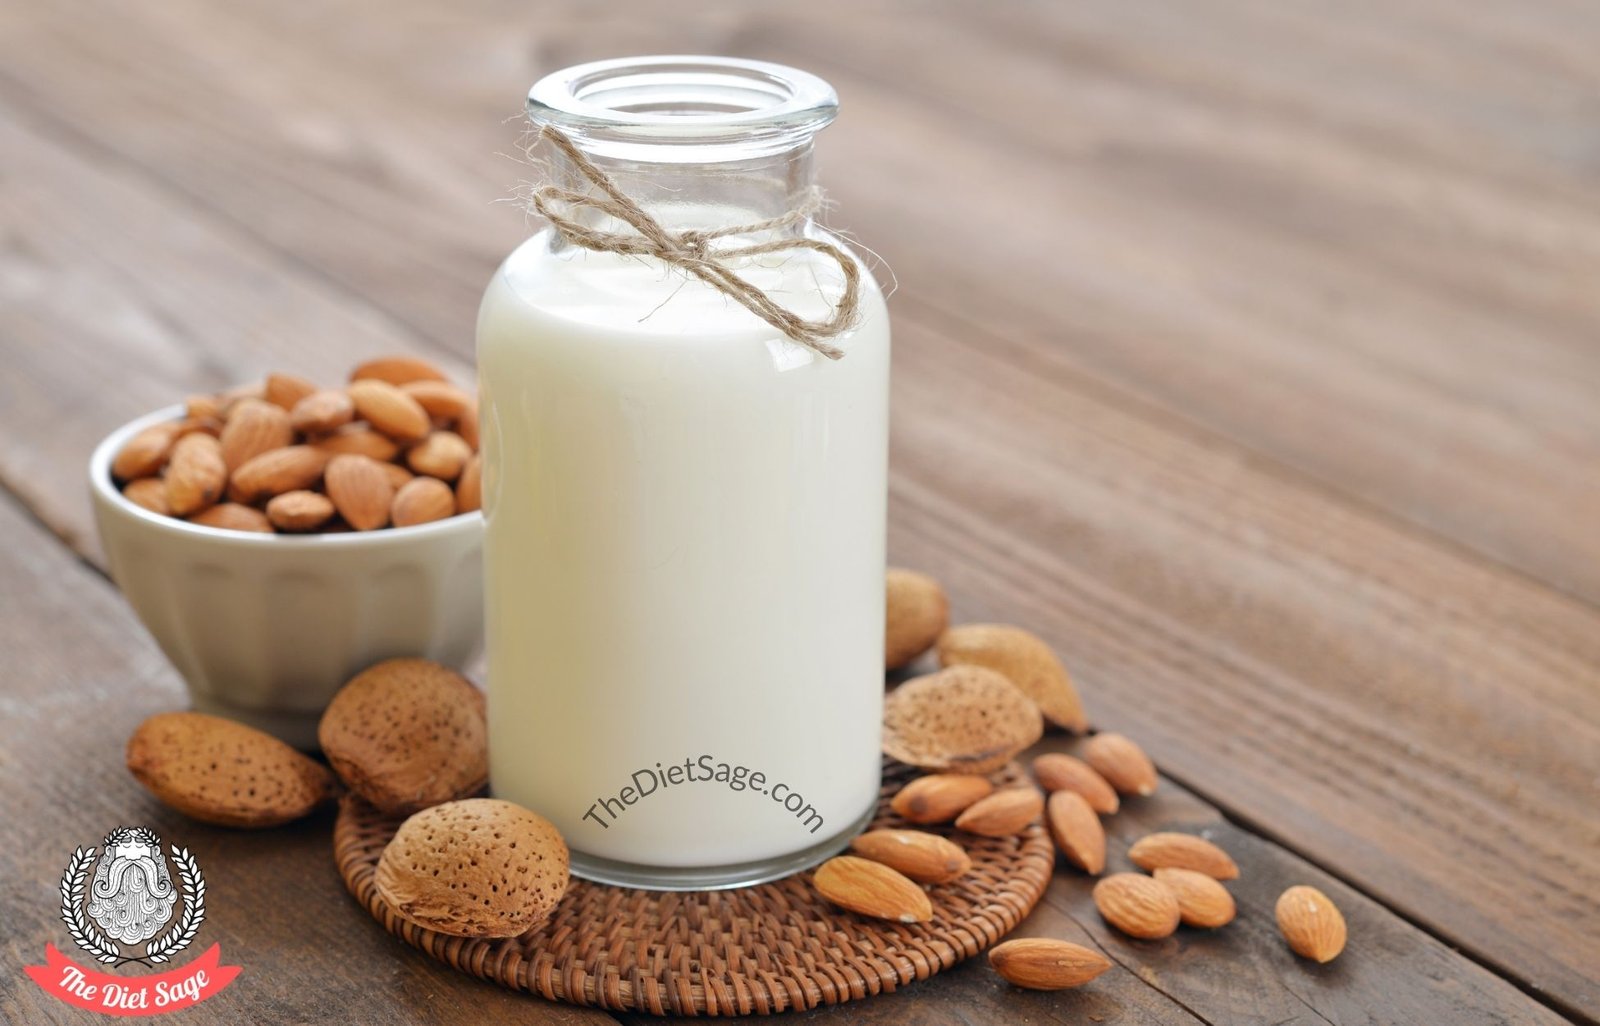 almond milk for weight loss